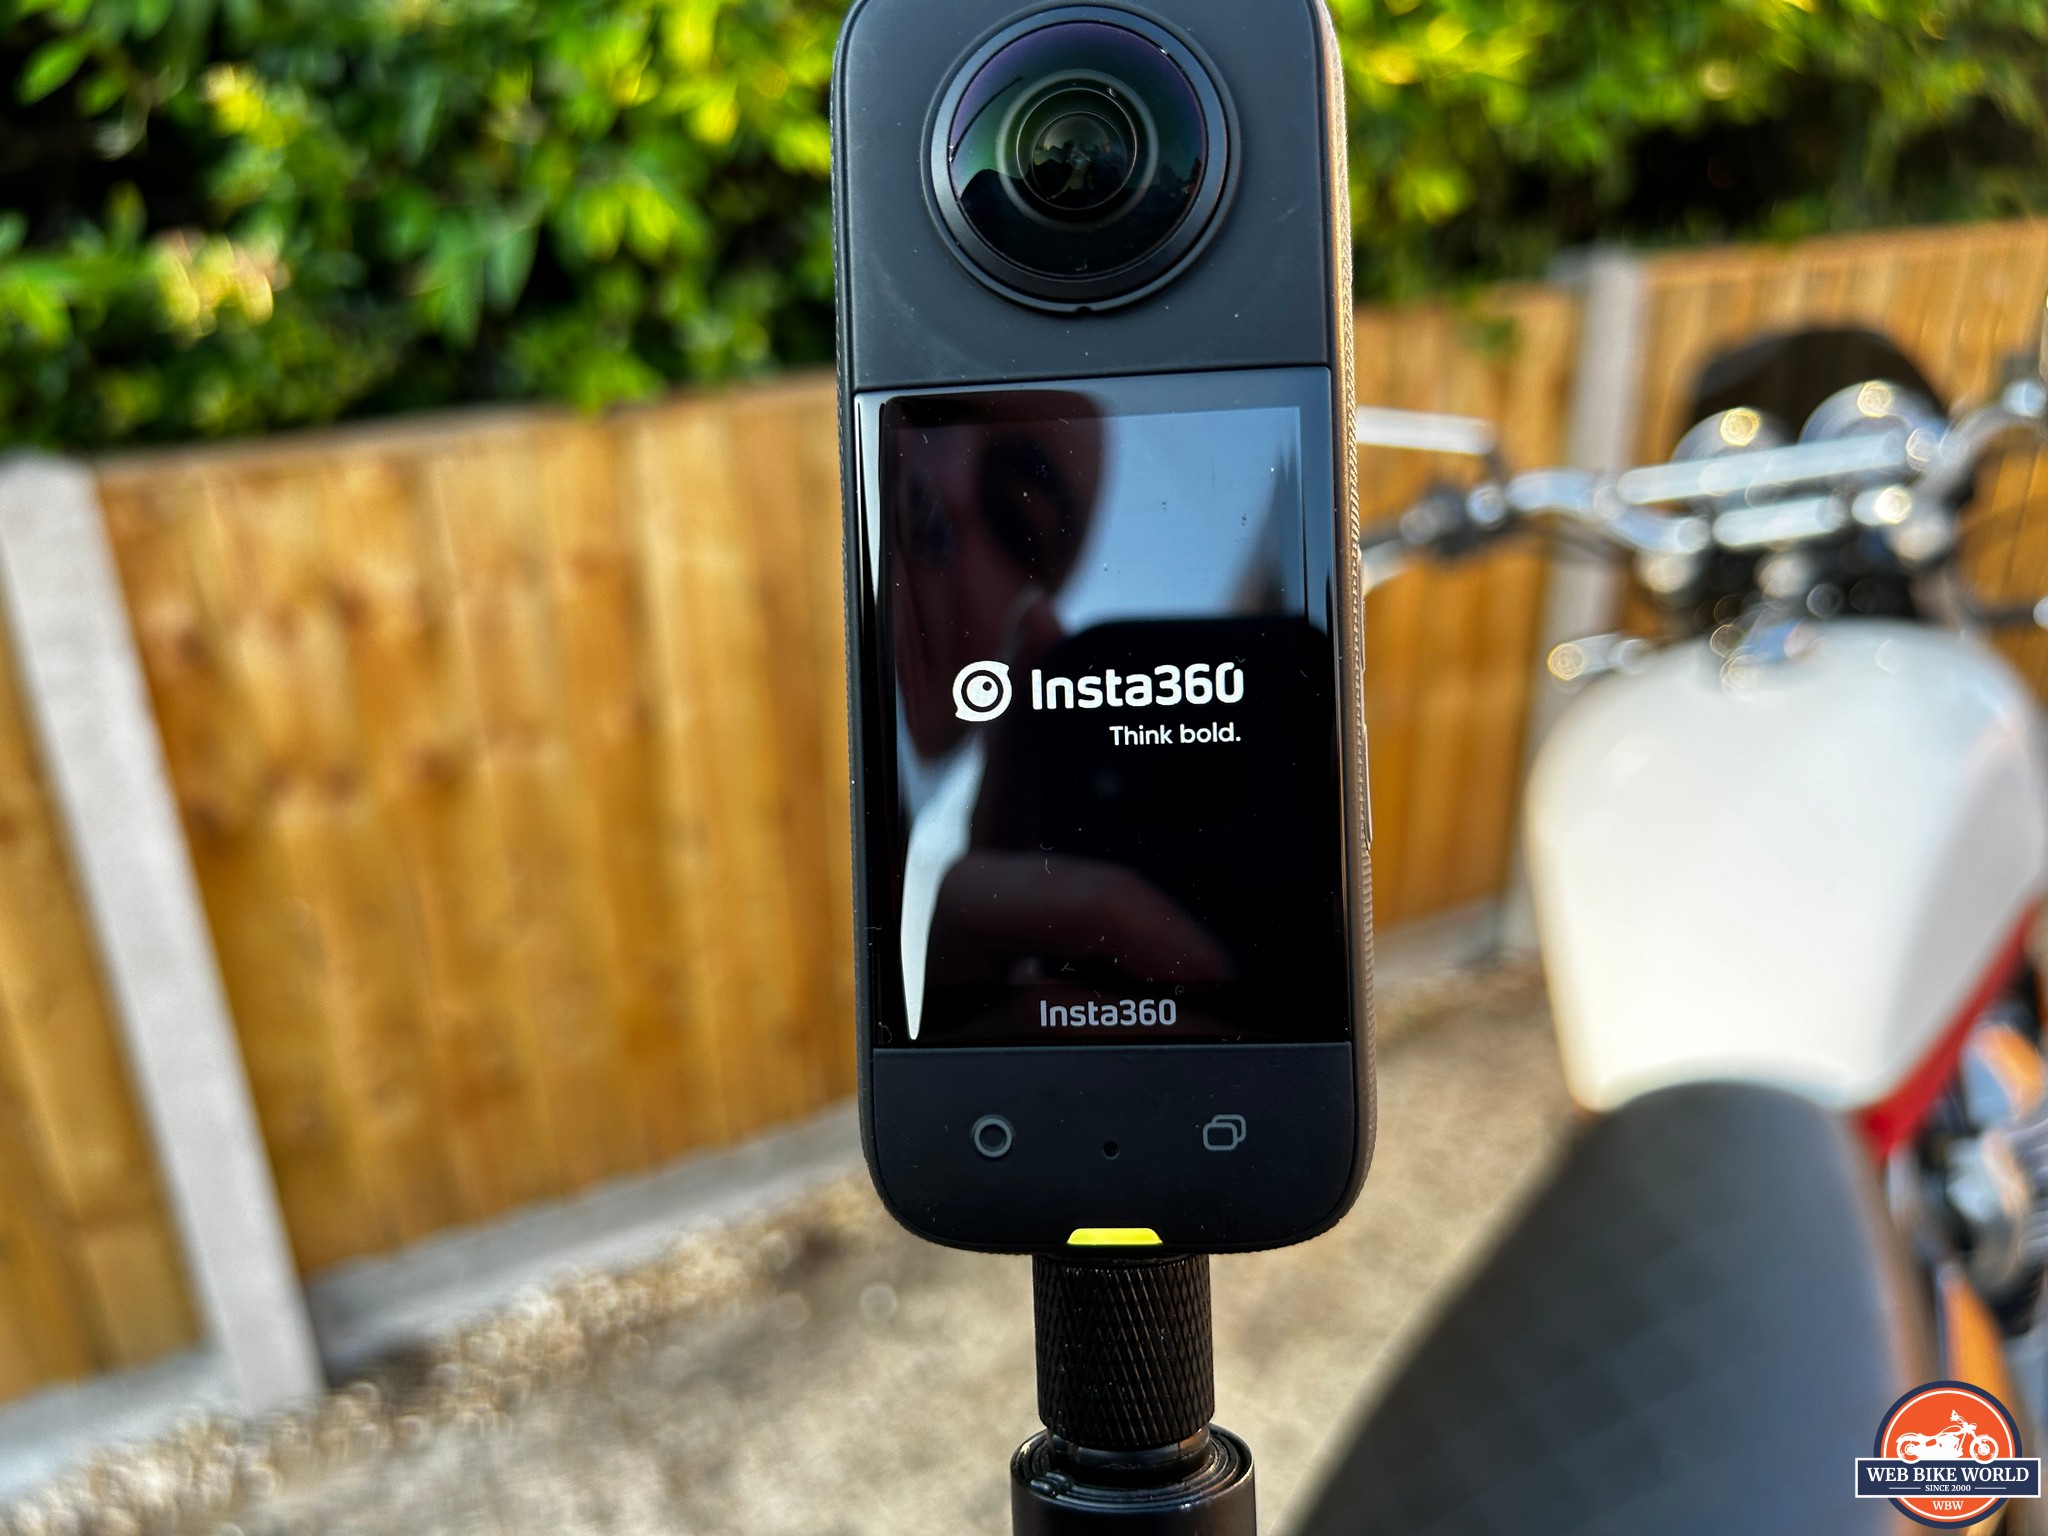 Insta360 X3 action camera review: Better than a GoPro for general users